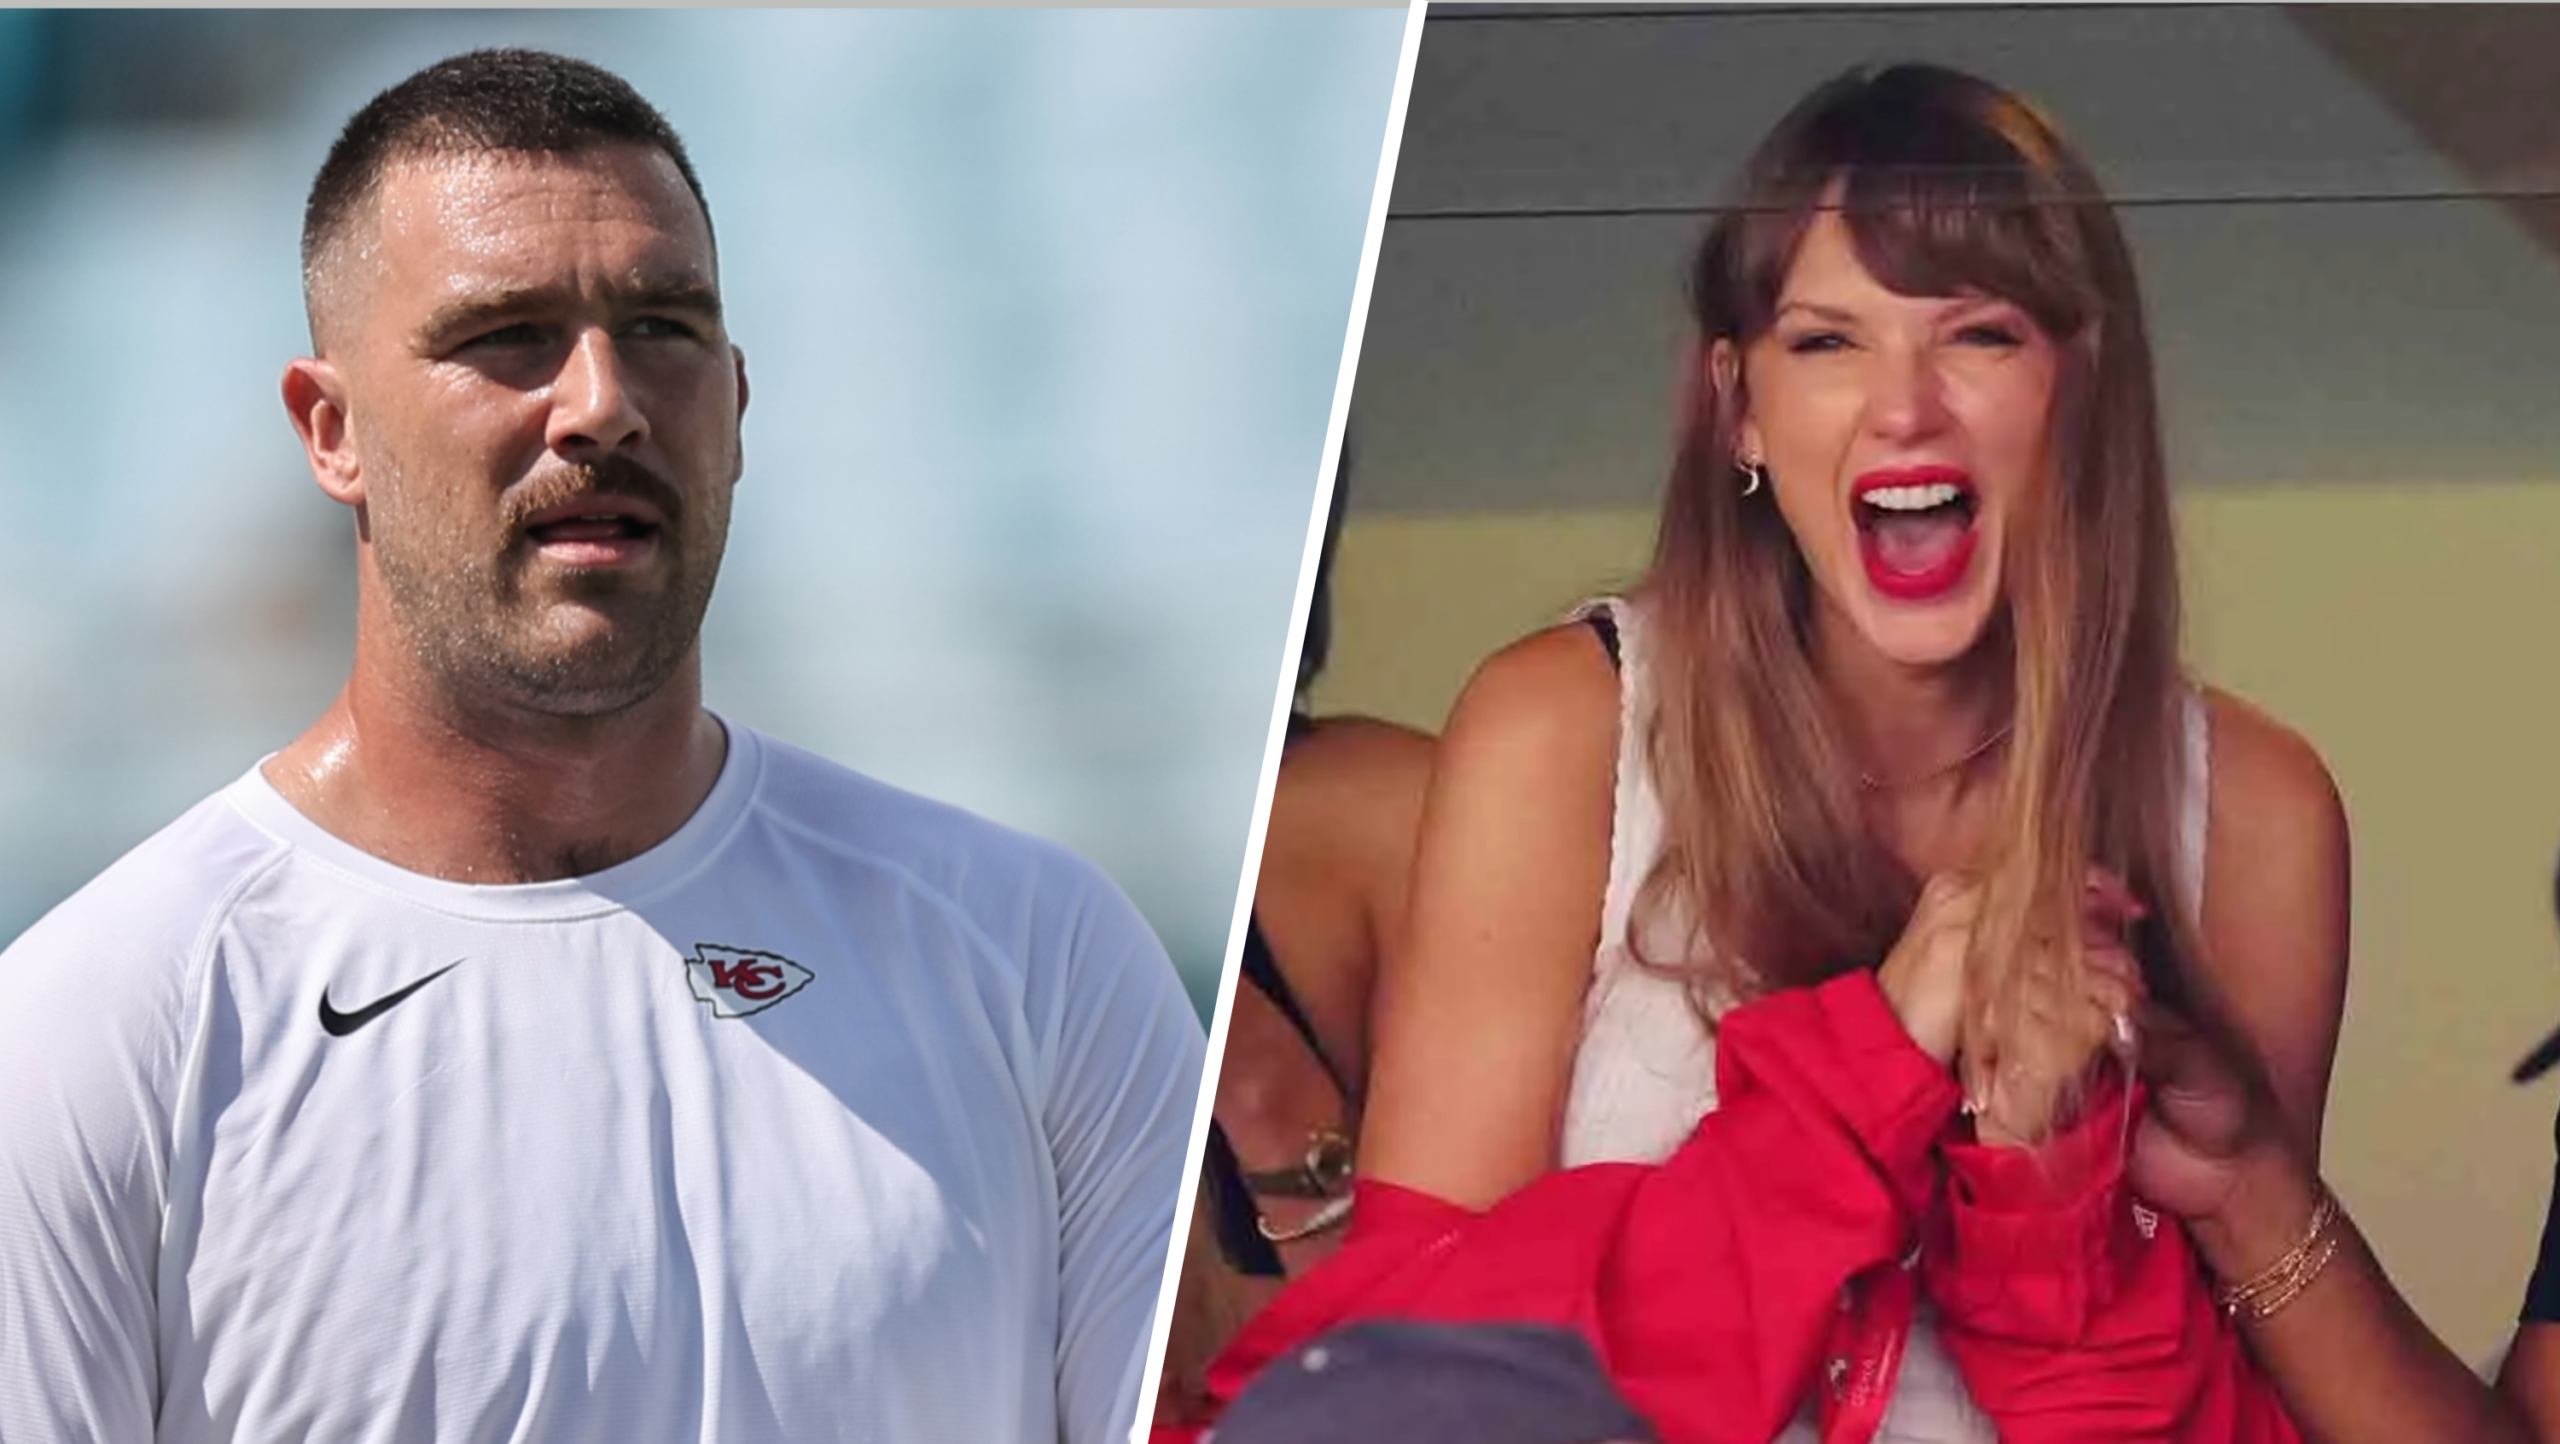 EXCLUSIVE: Every day, two things happen for sure: someone refuels their car, and Taylor Swift makes headlines. Here''s inside Taylor Swift’s personal life, childhood, relationships, Travis Kelce, concerts, private jets...